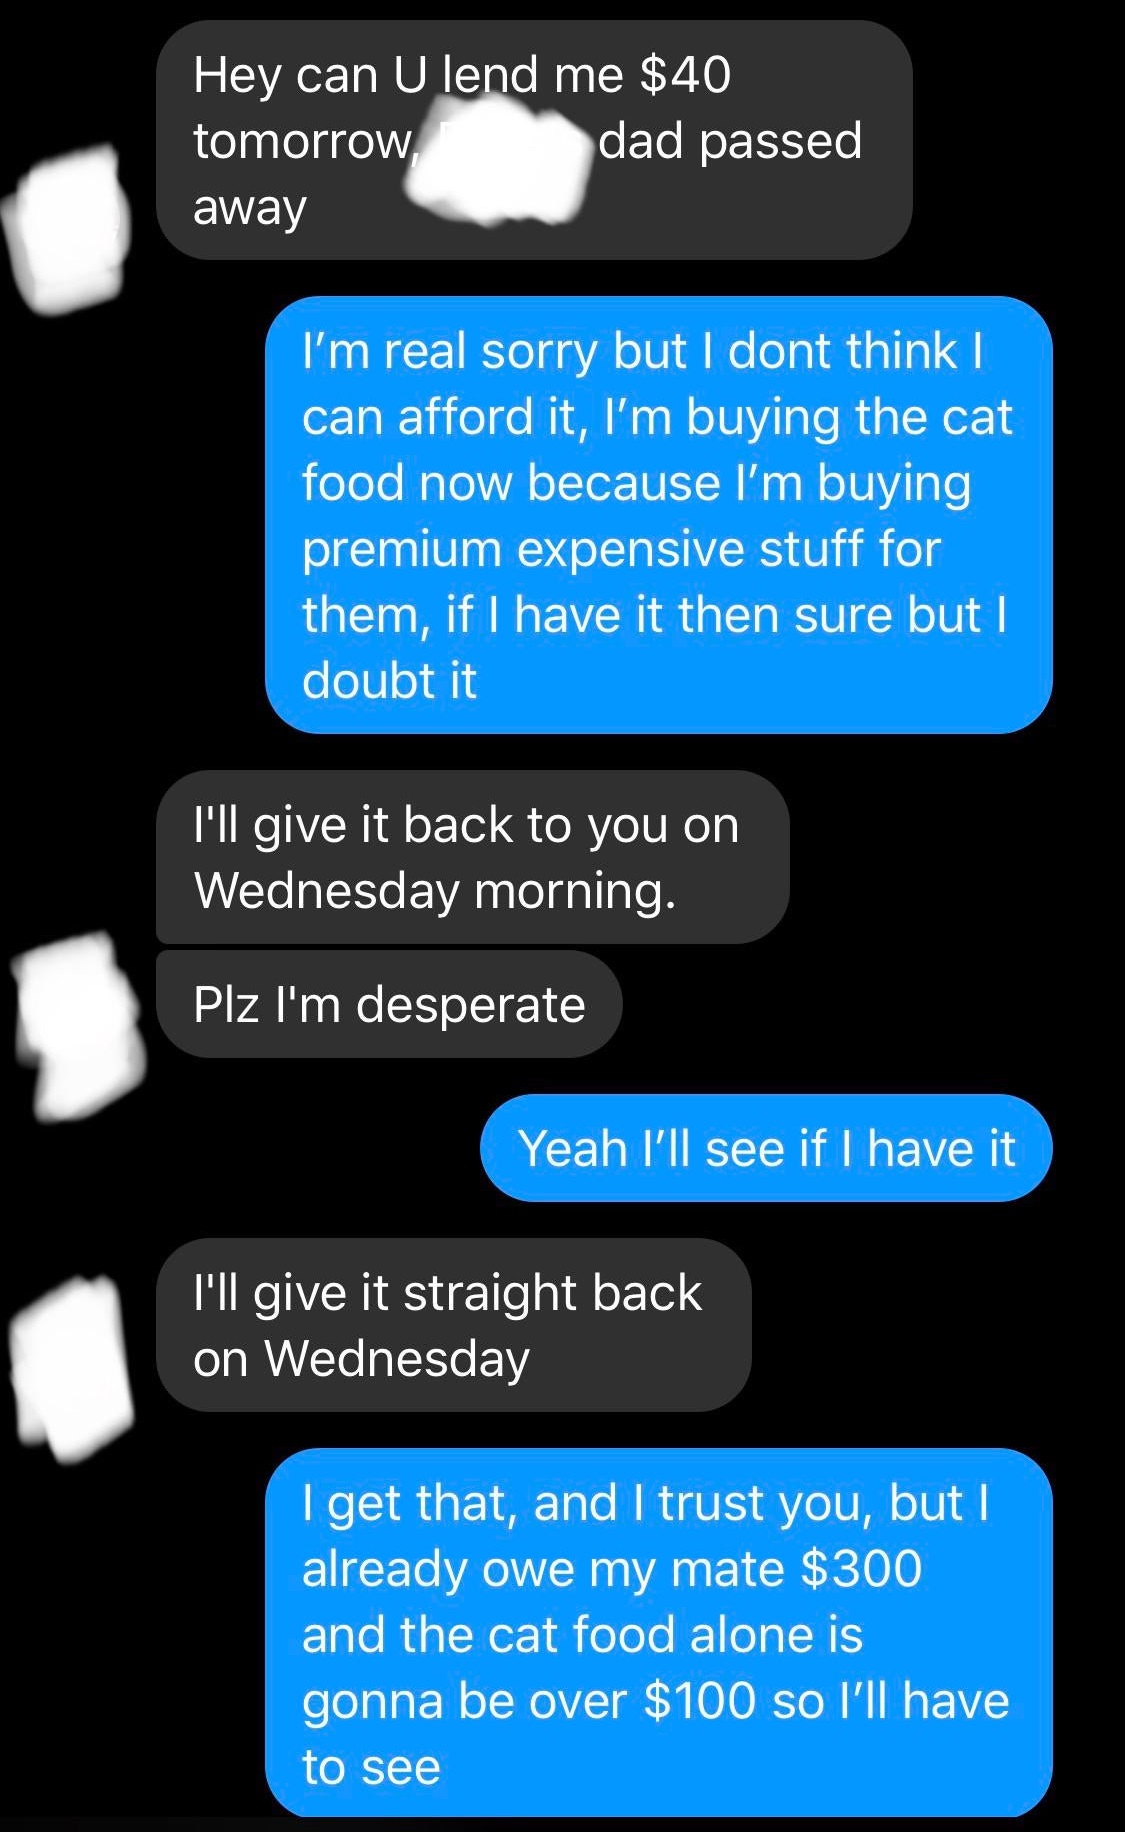 multimedia - Hey can U lend me $40 tomorrow dad passed away I'm real sorry but I dont think I can afford it, I'm buying the cat food now because I'm buying premium expensive stuff for them, if I have it then sure but I doubt it I'll give it back to you on